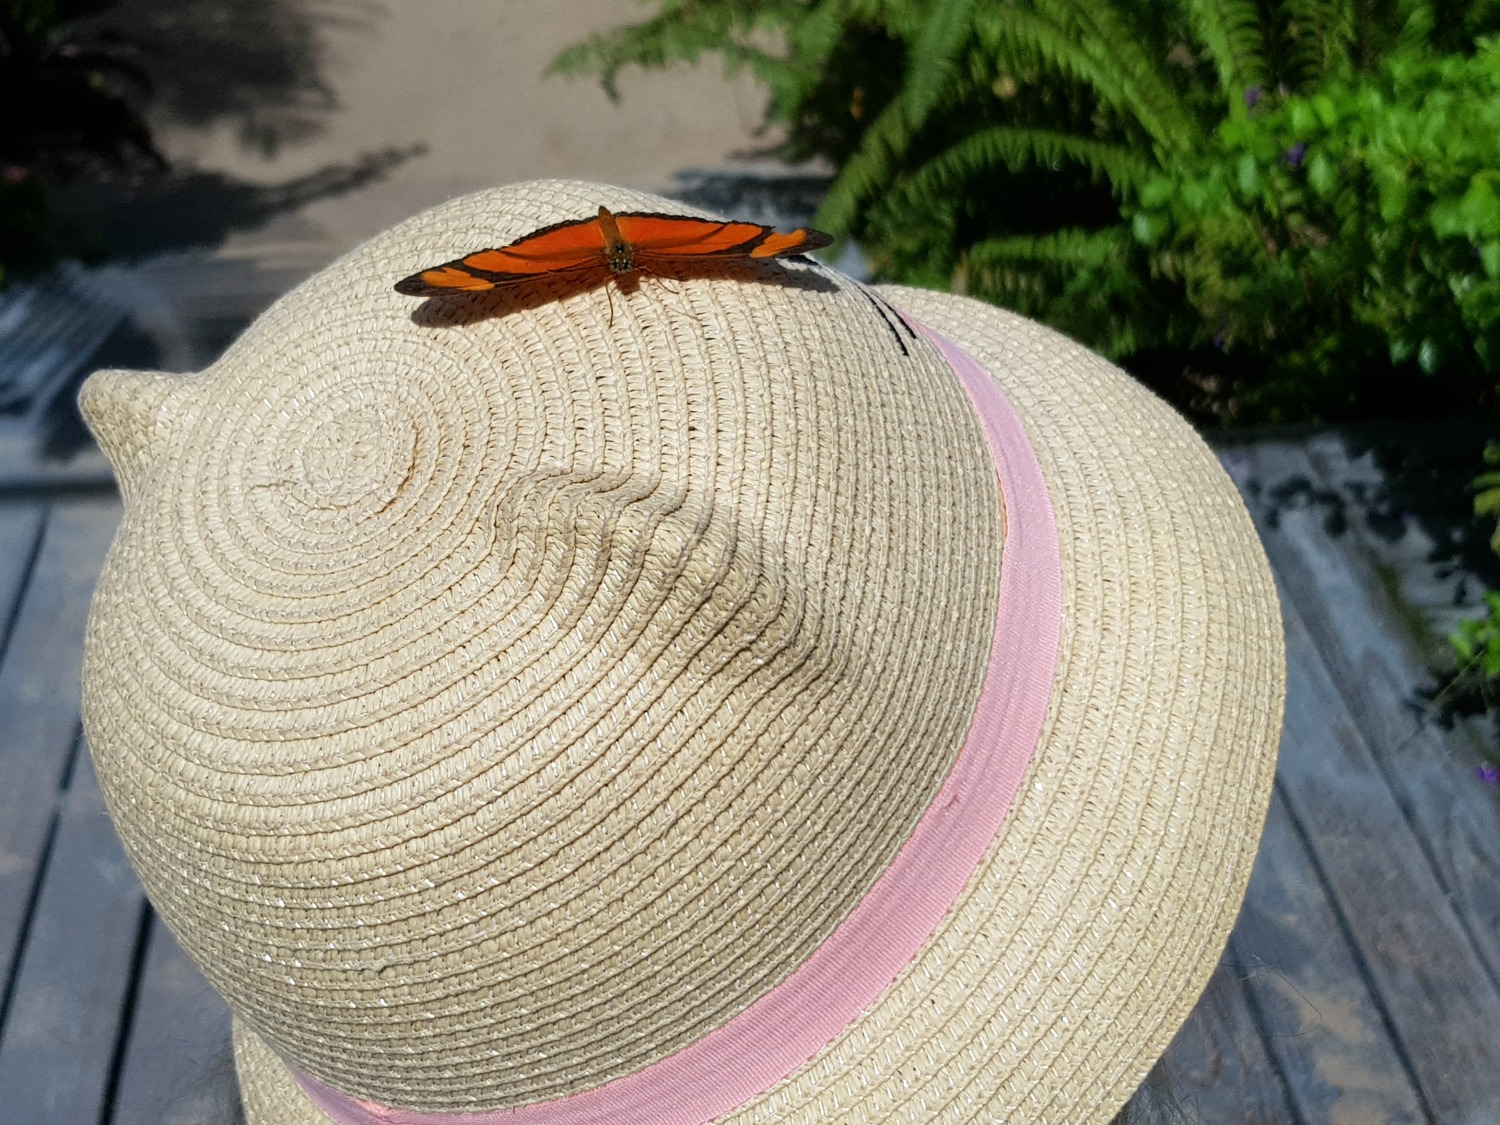 A brightly coloured butterfly settles on my daughter's hat during out visit to the Butterfly Farm on Aruba